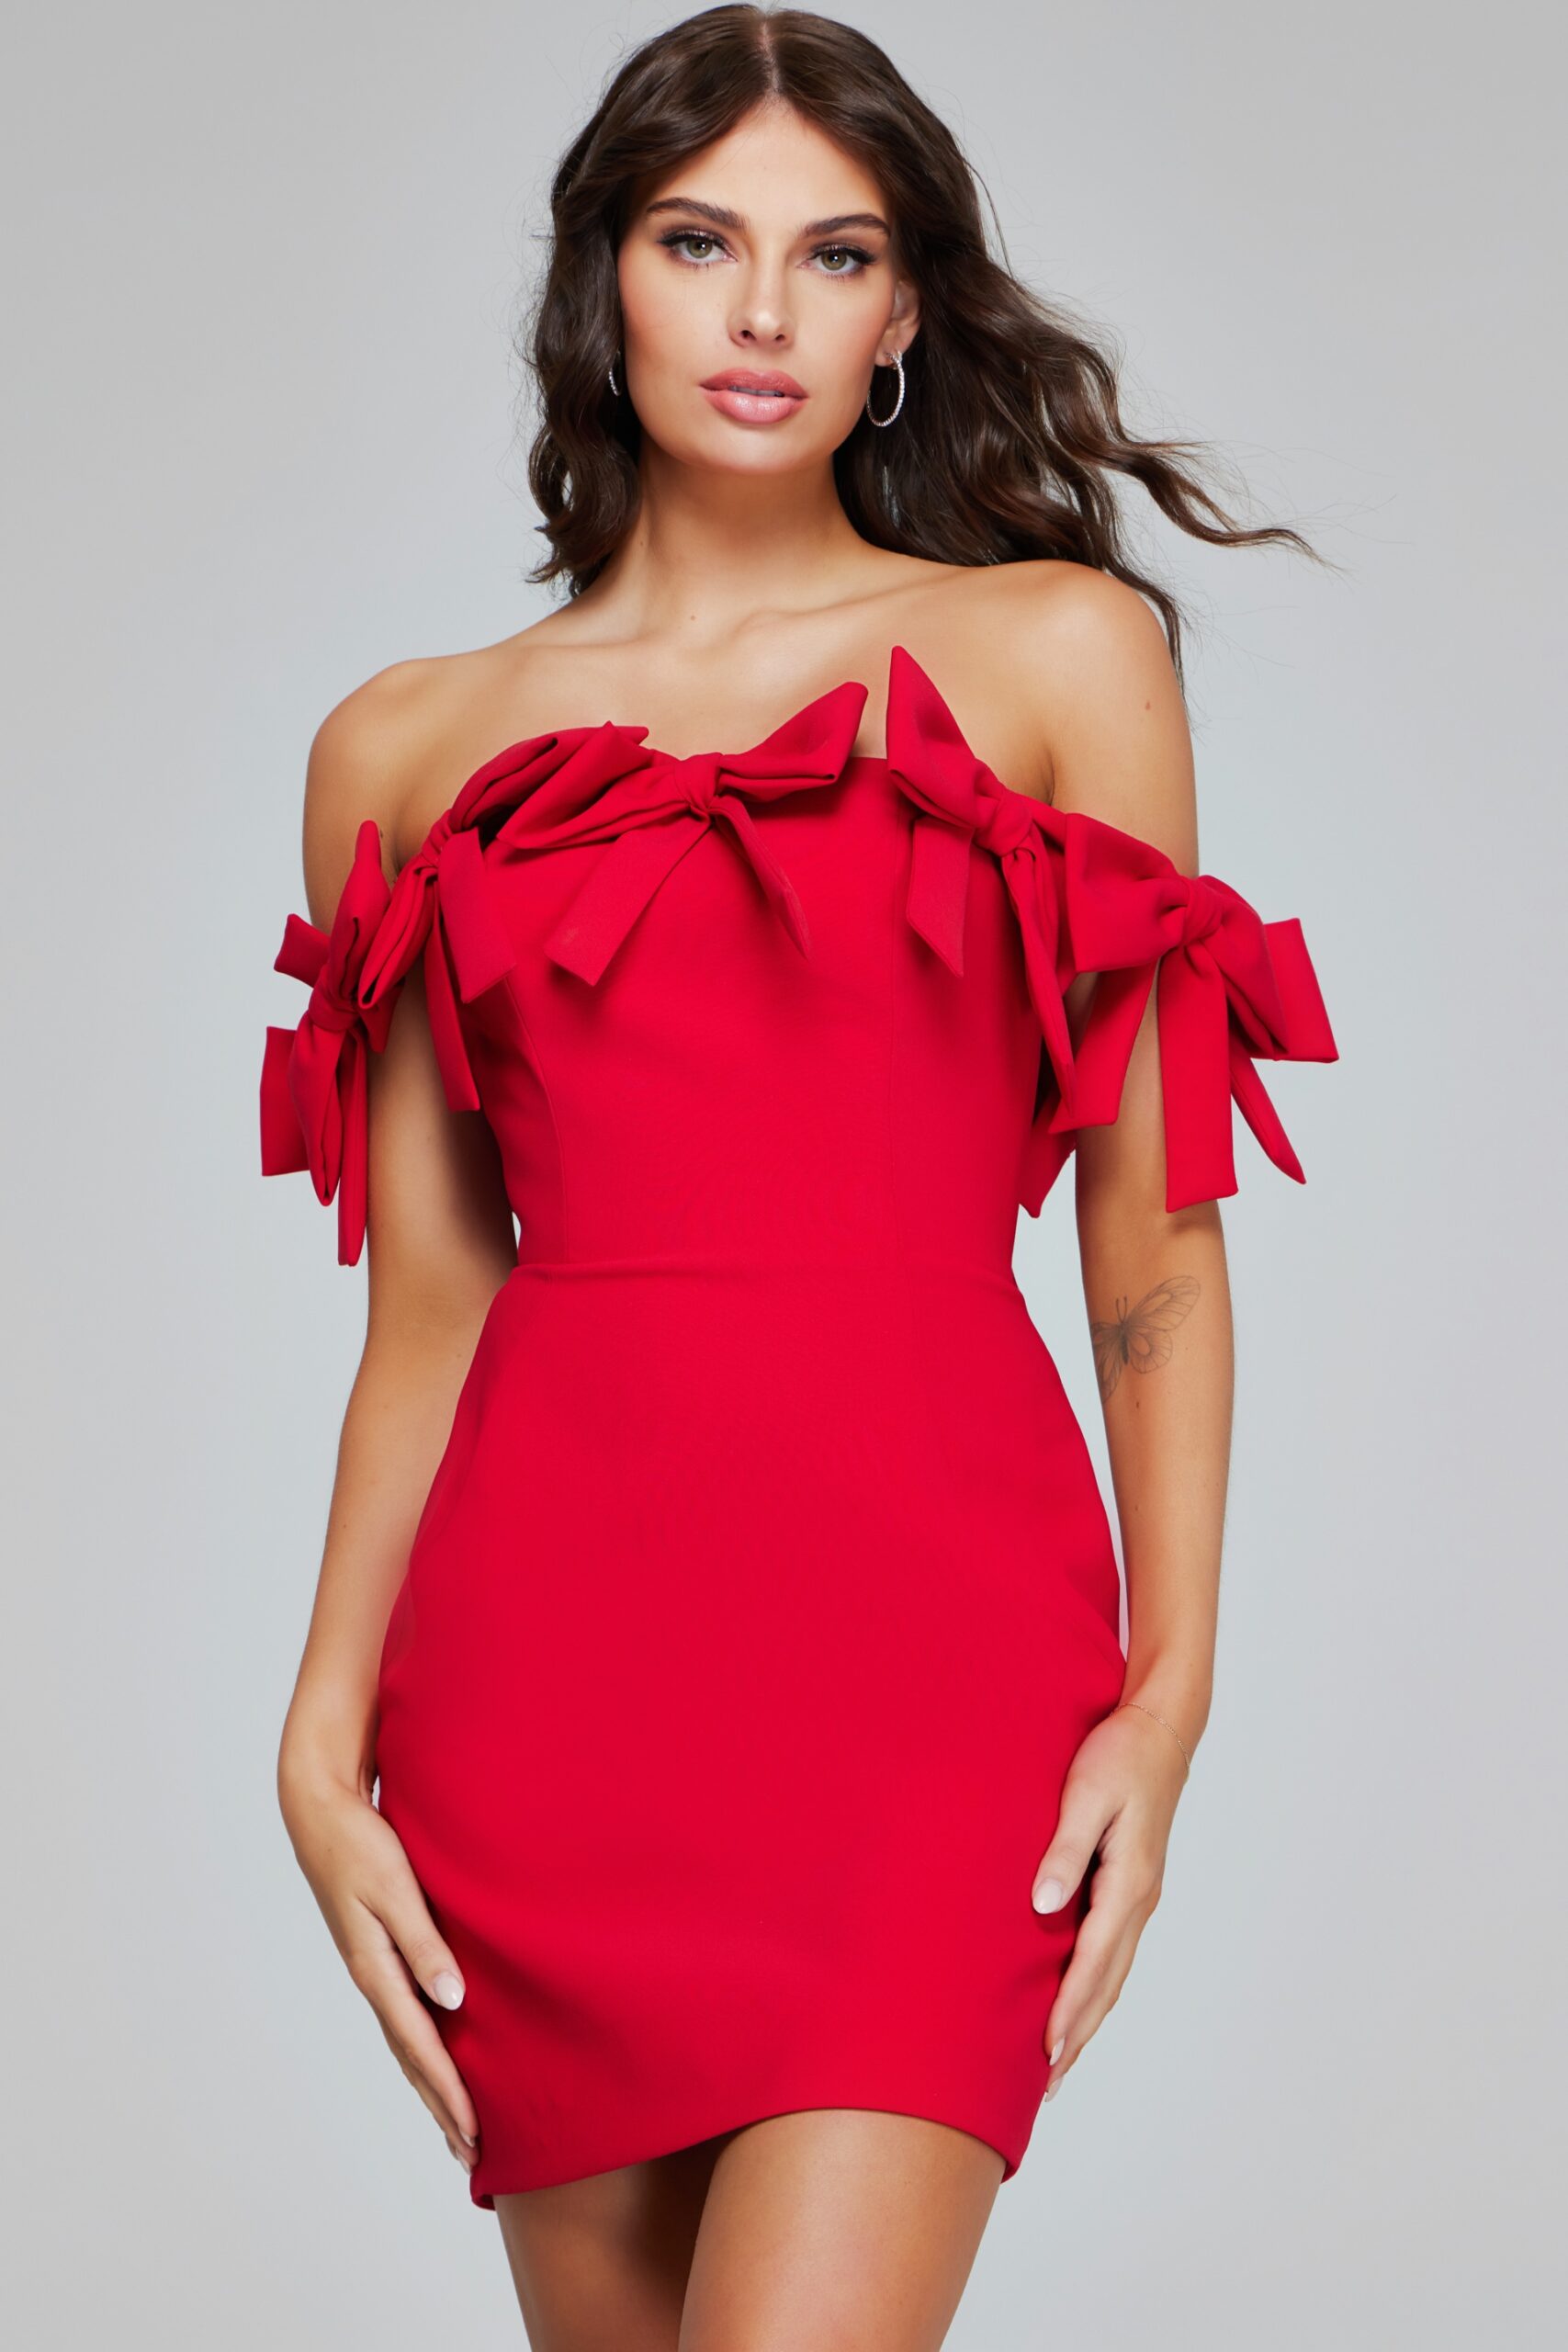 Model wearing Strapless Red Fitted Dress 40185